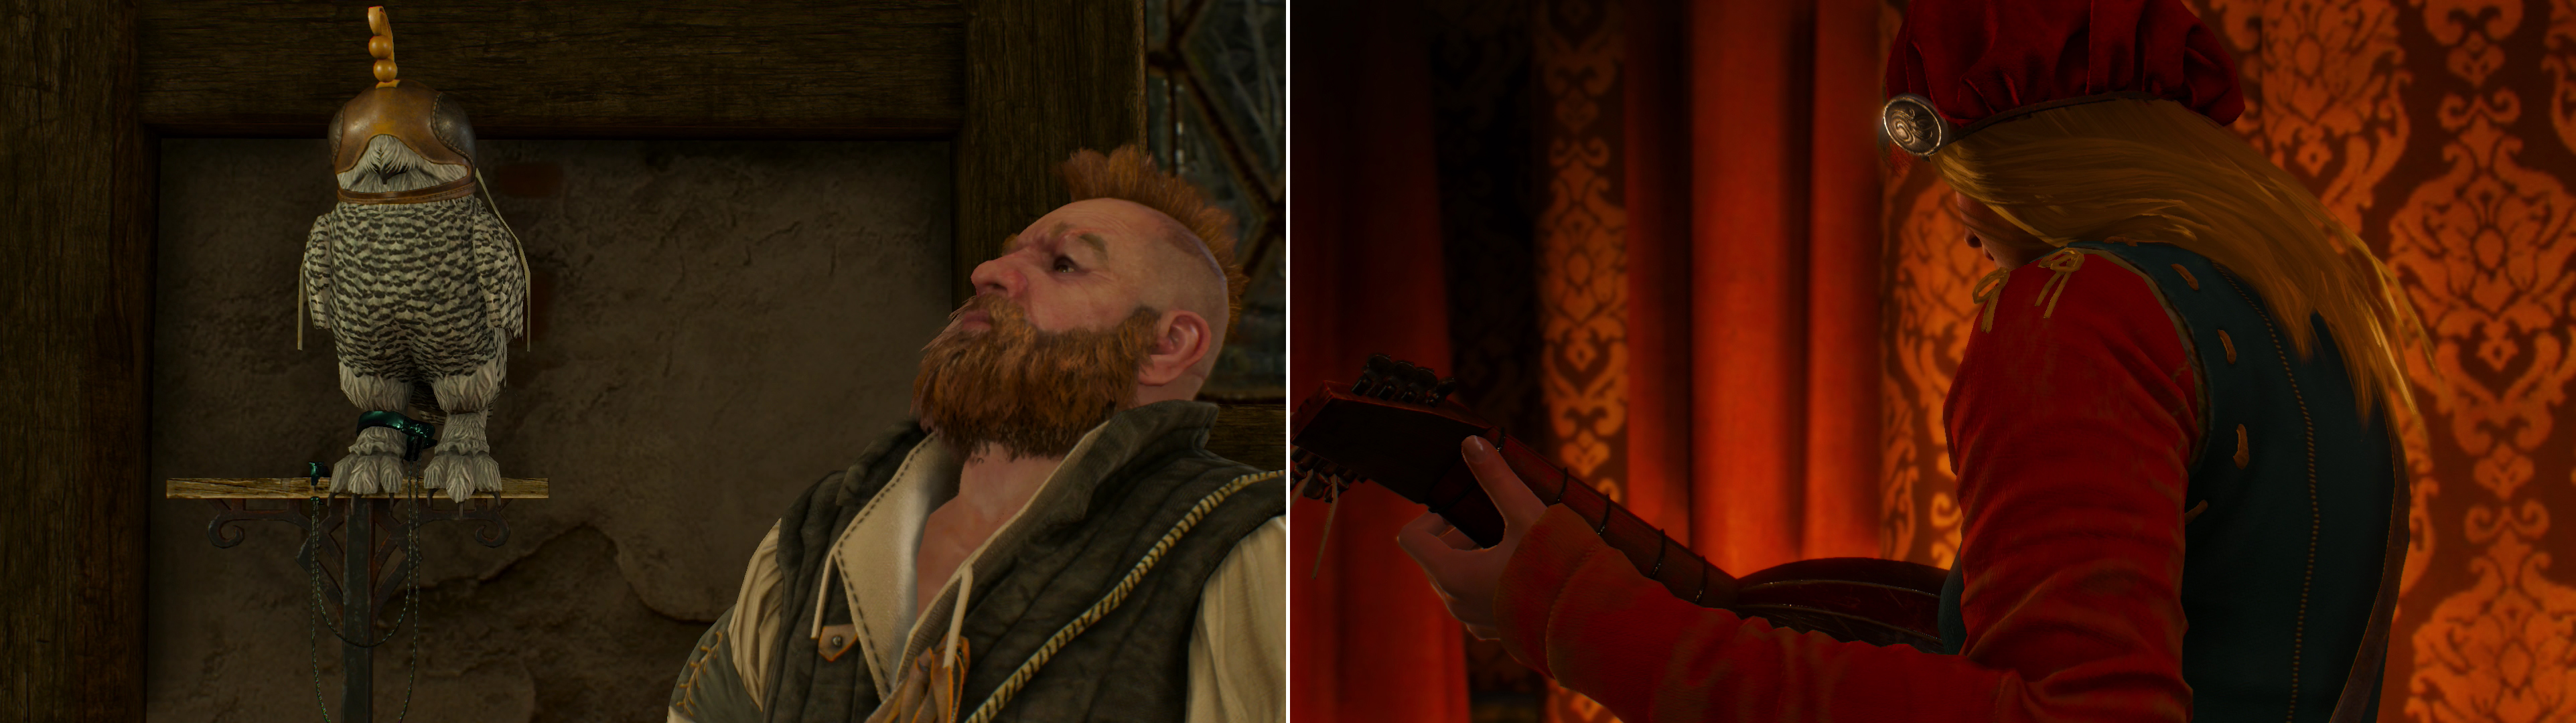 Zoltan shows off his newly-aquired, and oddly-attired, pet (left). After some expert investigation Geralt follows the leads to the object of Dandelion's ongoing infatuation (right).